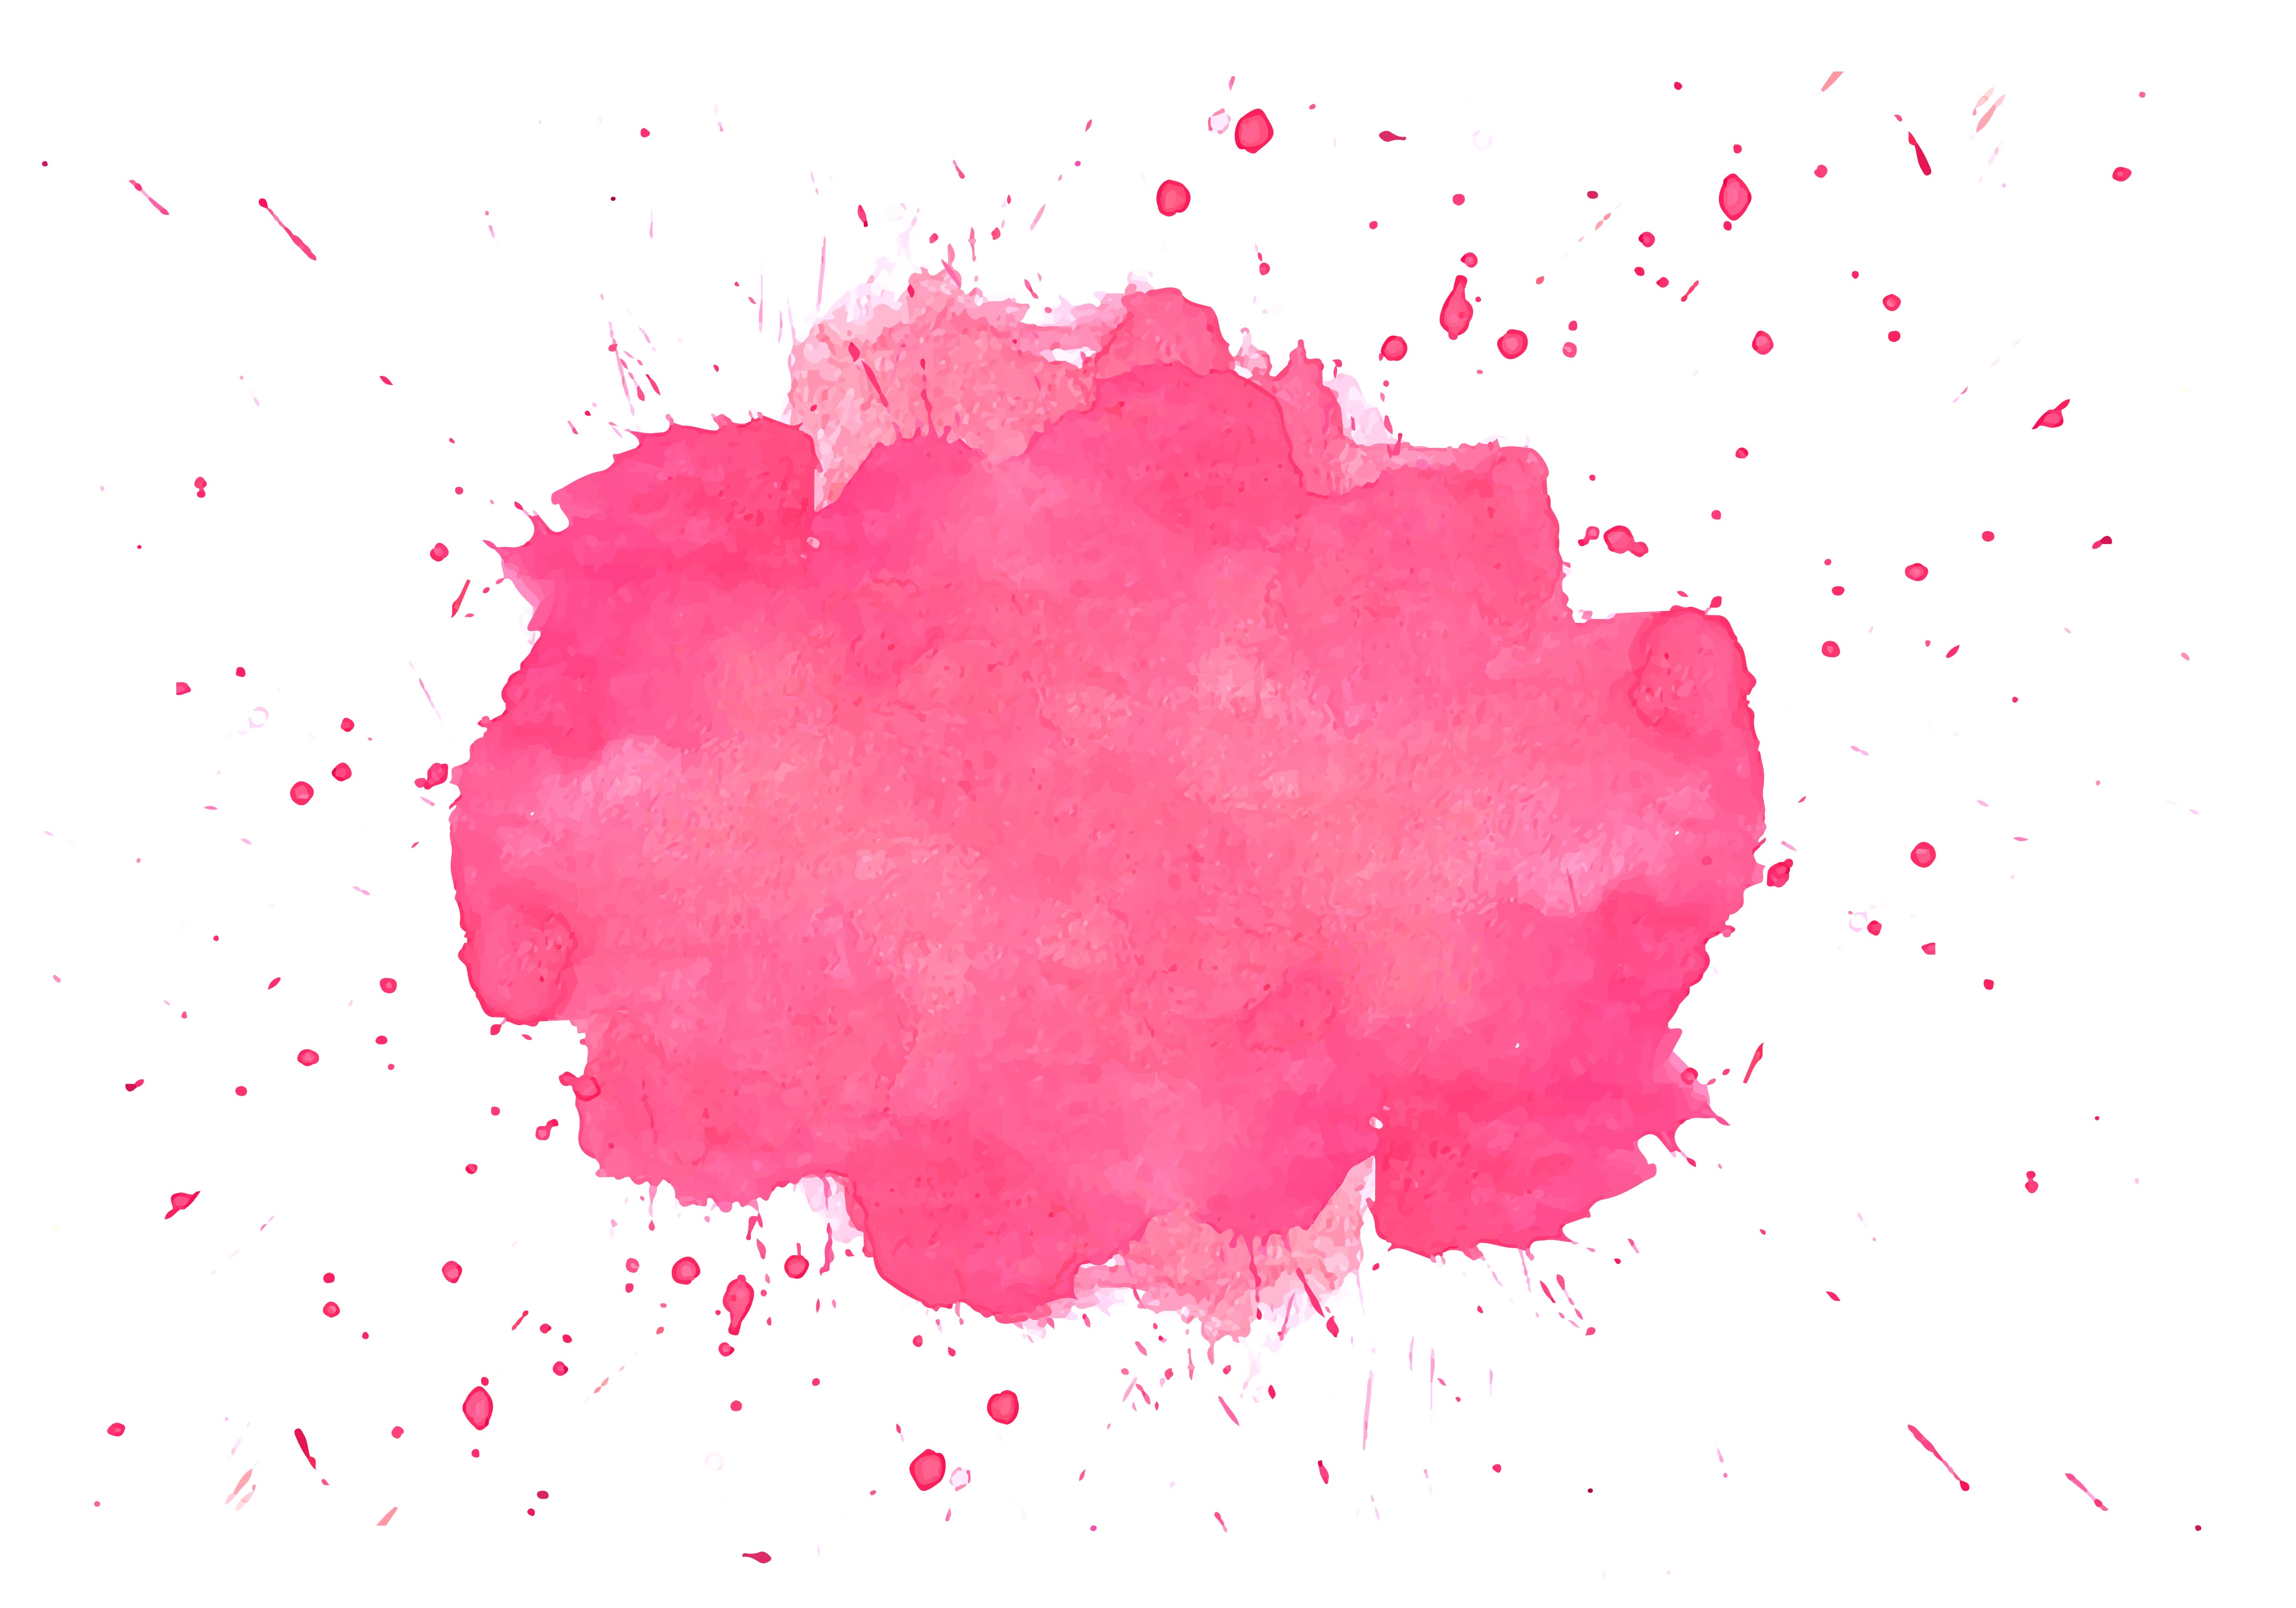 Soft Pink Mixed Watercolor Background Graphic by Splash art